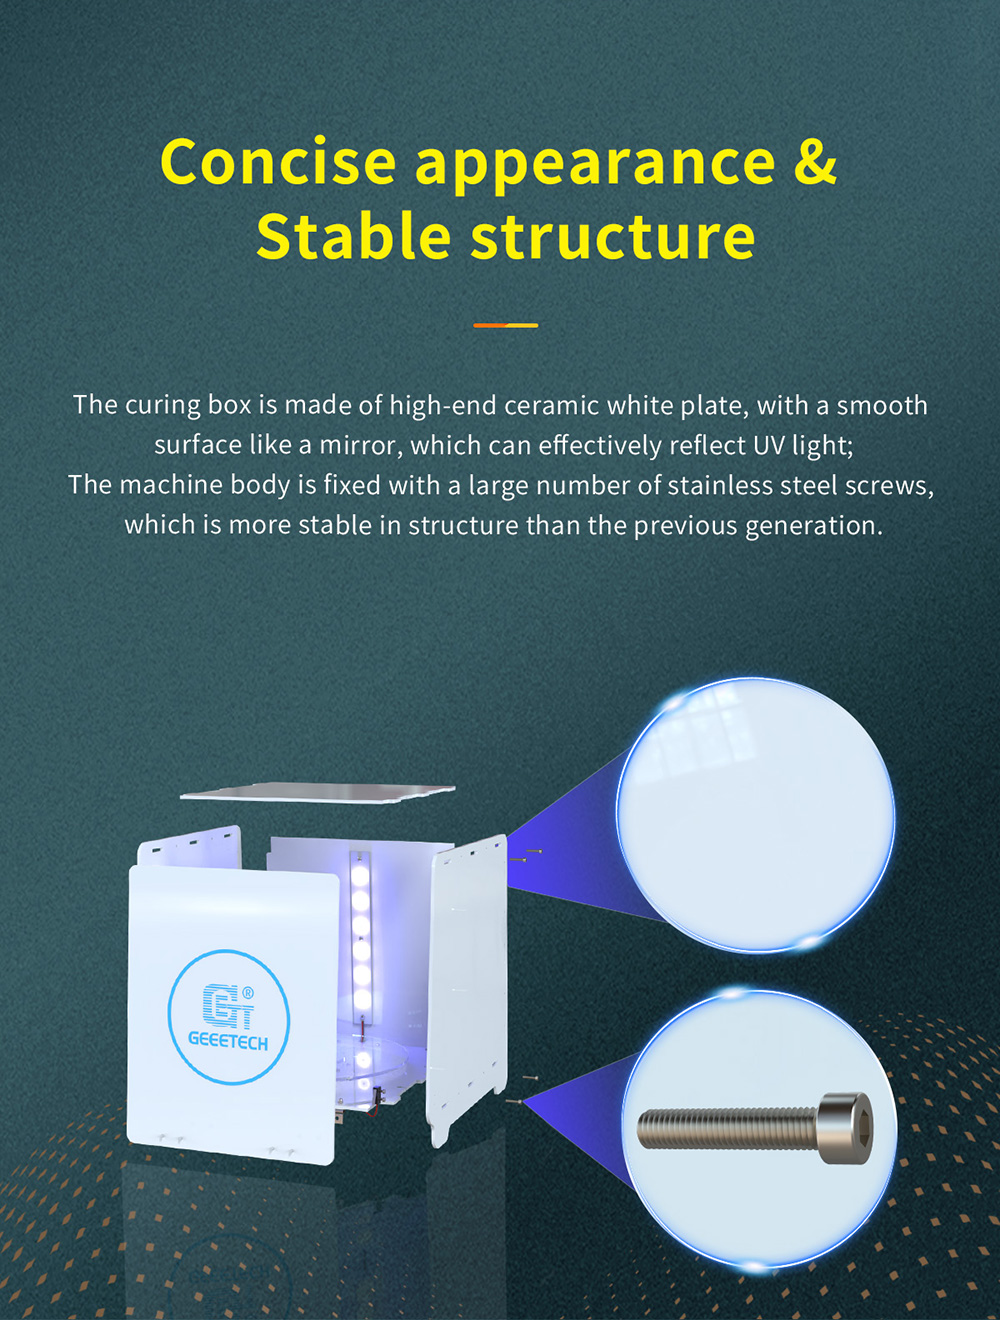 geeetech cgb-2 resin curing light box descriptiion of concise appearance & stable structure